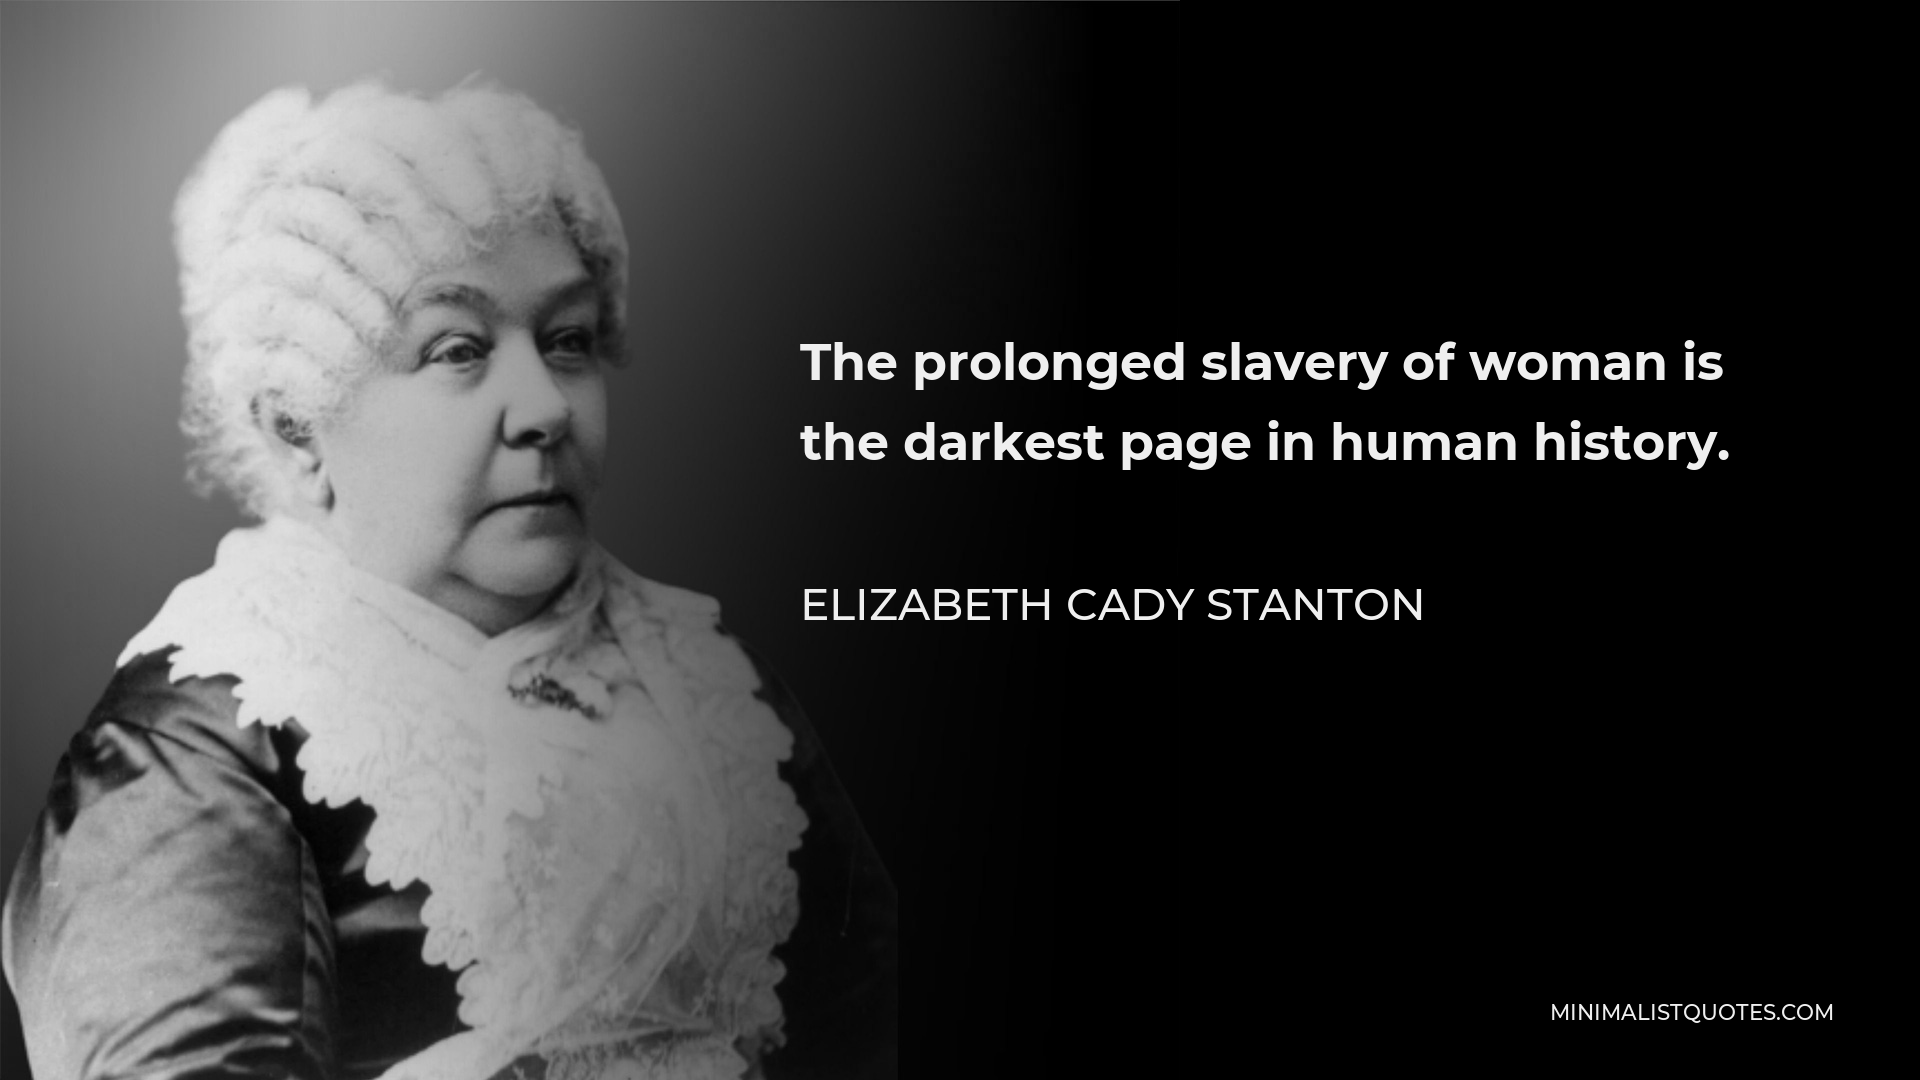 Elizabeth Cady Stanton Quote - The prolonged slavery of woman is the darkest page in human history.